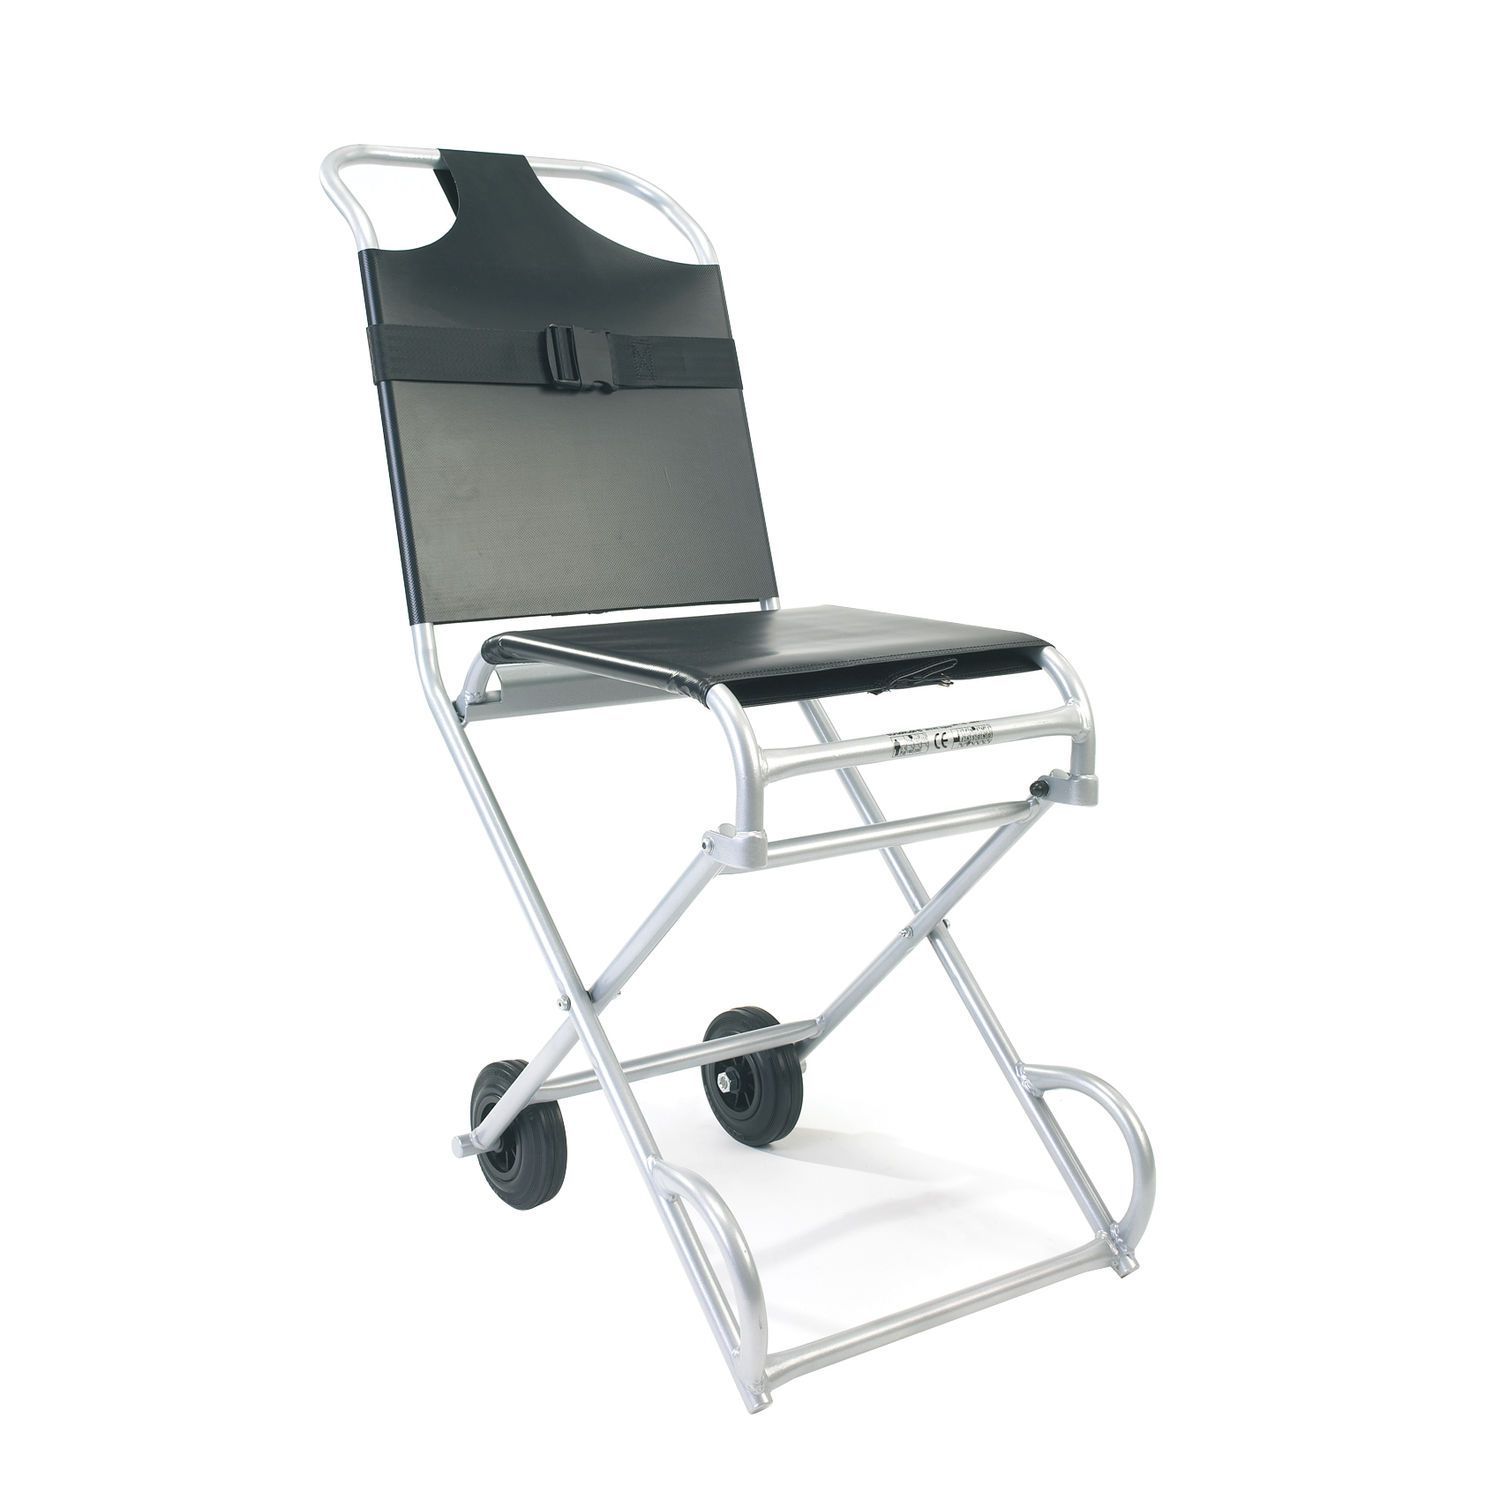 Folding patient transfer chair 114 kg | MK1 Mobyle Ferno (UK) Limited